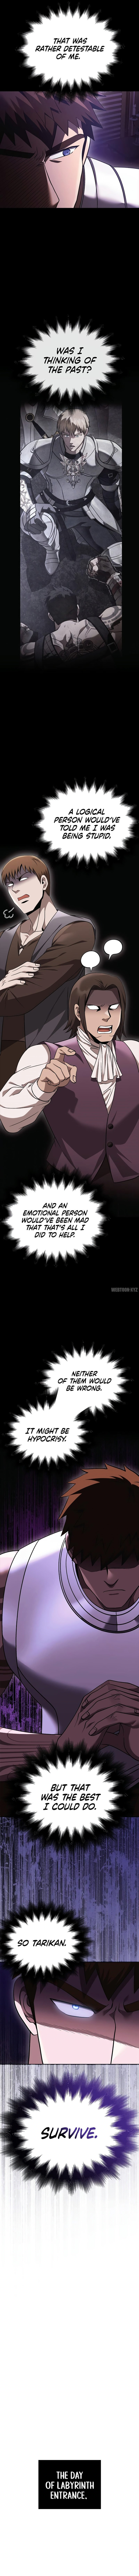 surviving-the-game-as-a-barbarian-chap-37-11